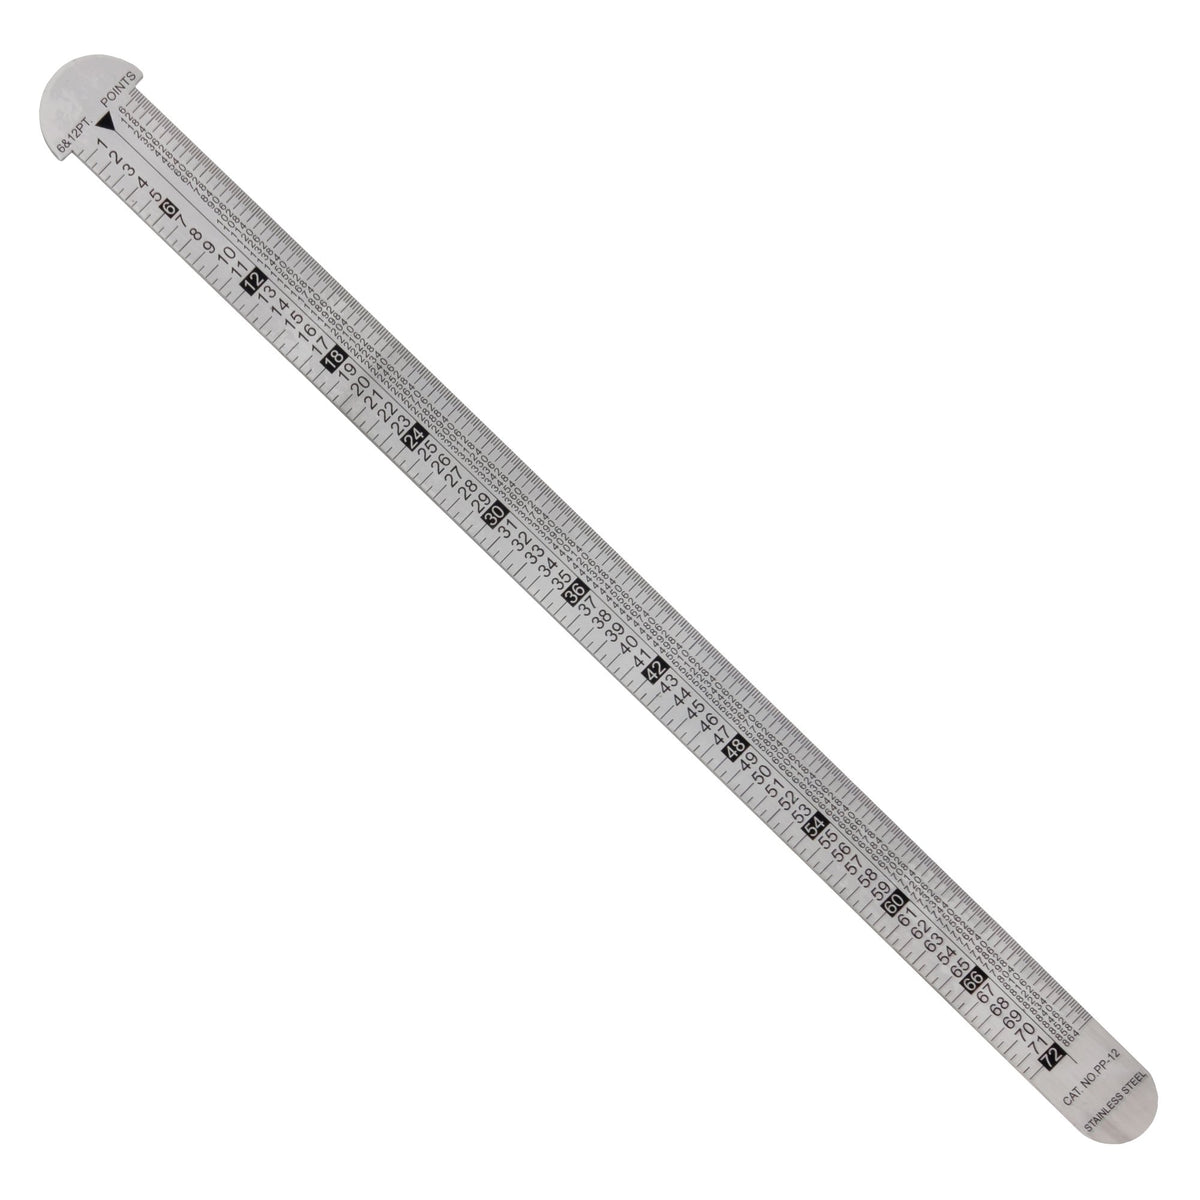  Pacific Arc 24 Straight Edge Stainless Steel, Inch  Graduations, 0.09 Thick Steel, English Scale, Heavy Duty : Office Products